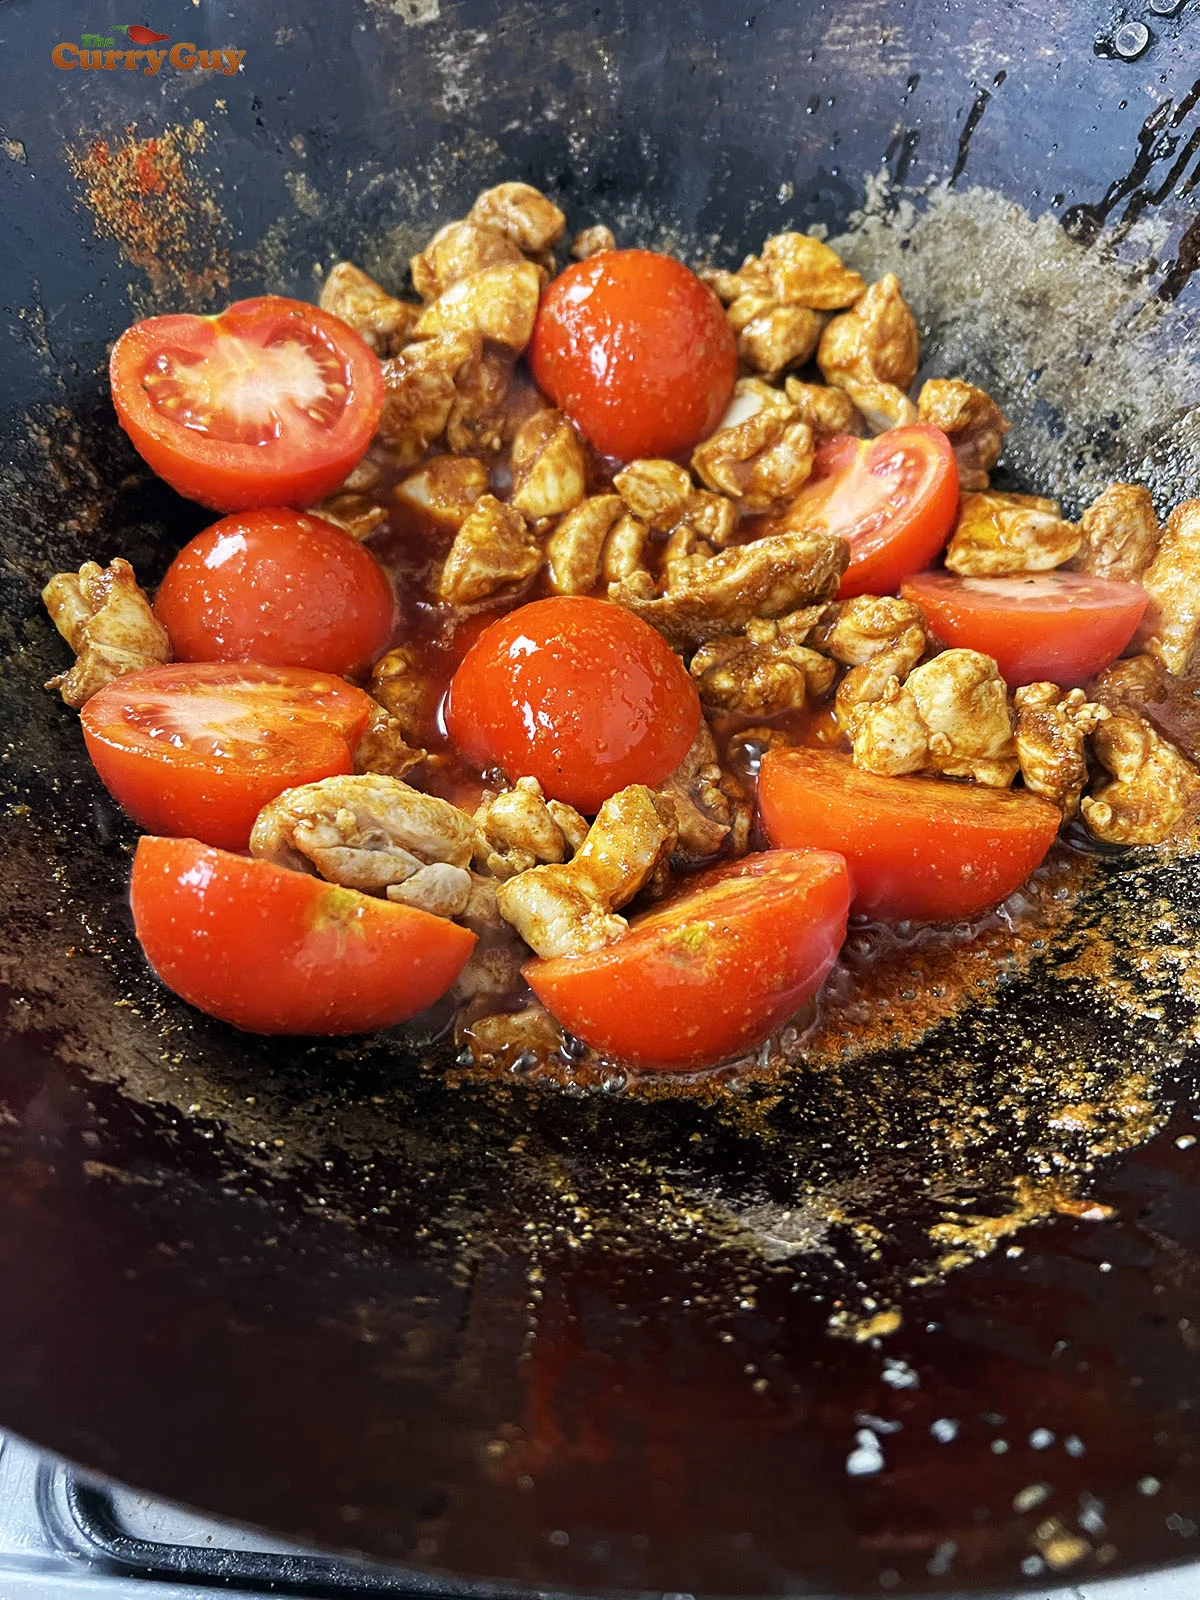 Adding the ground spices and tomatoes